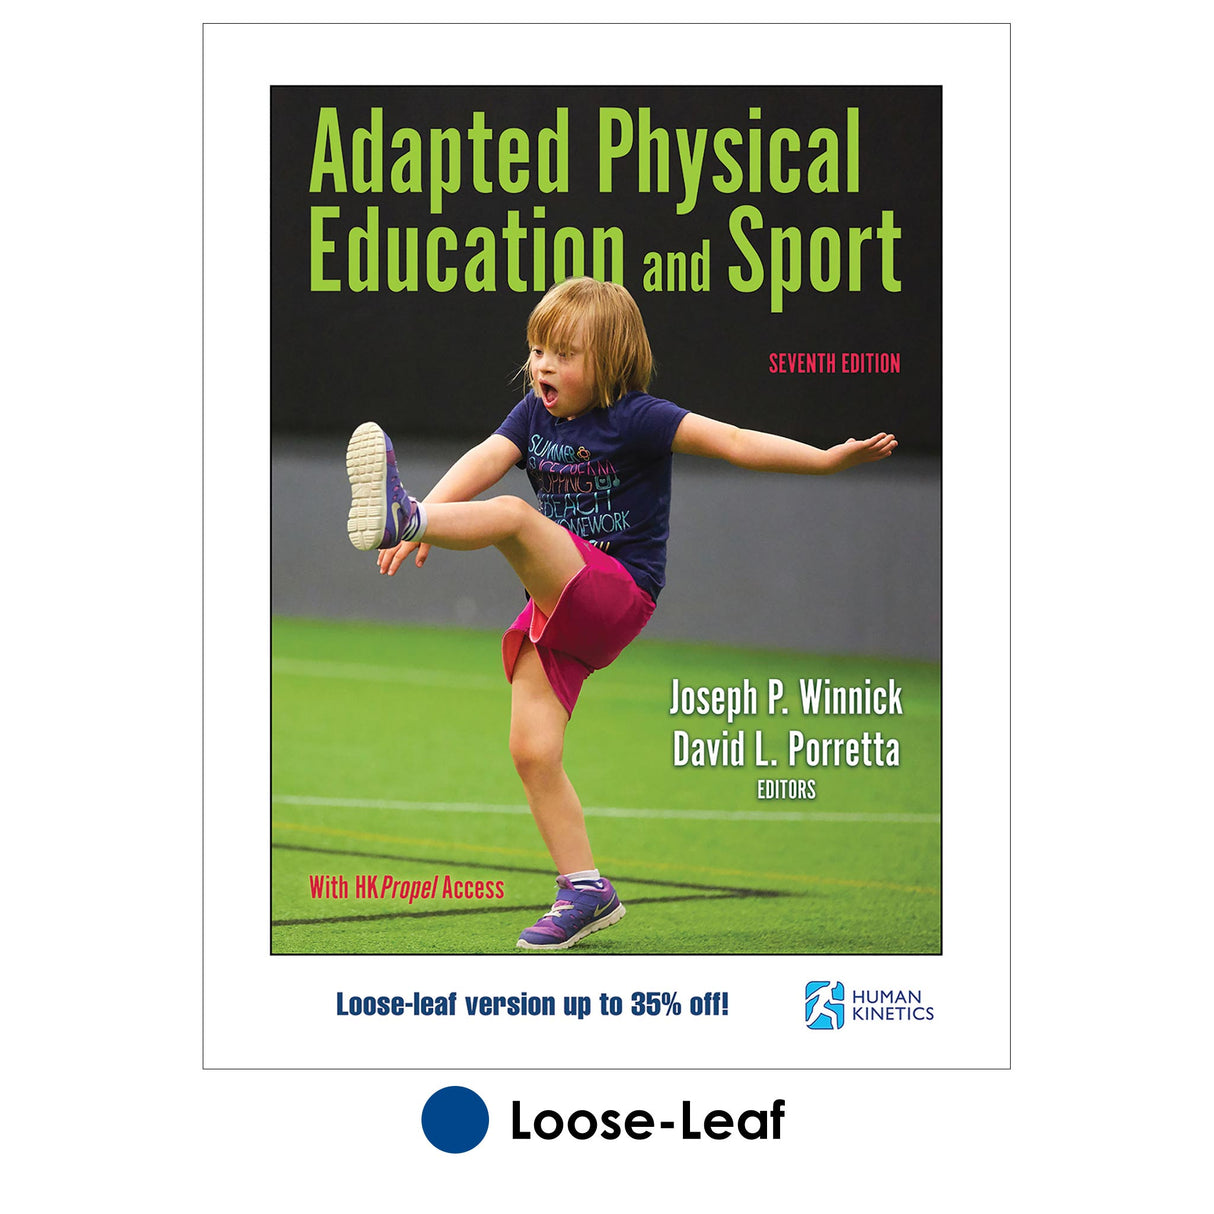 Adapted Physical Education and Sport 7th Edition With HKPropel Access-Loose-Leaf Edition